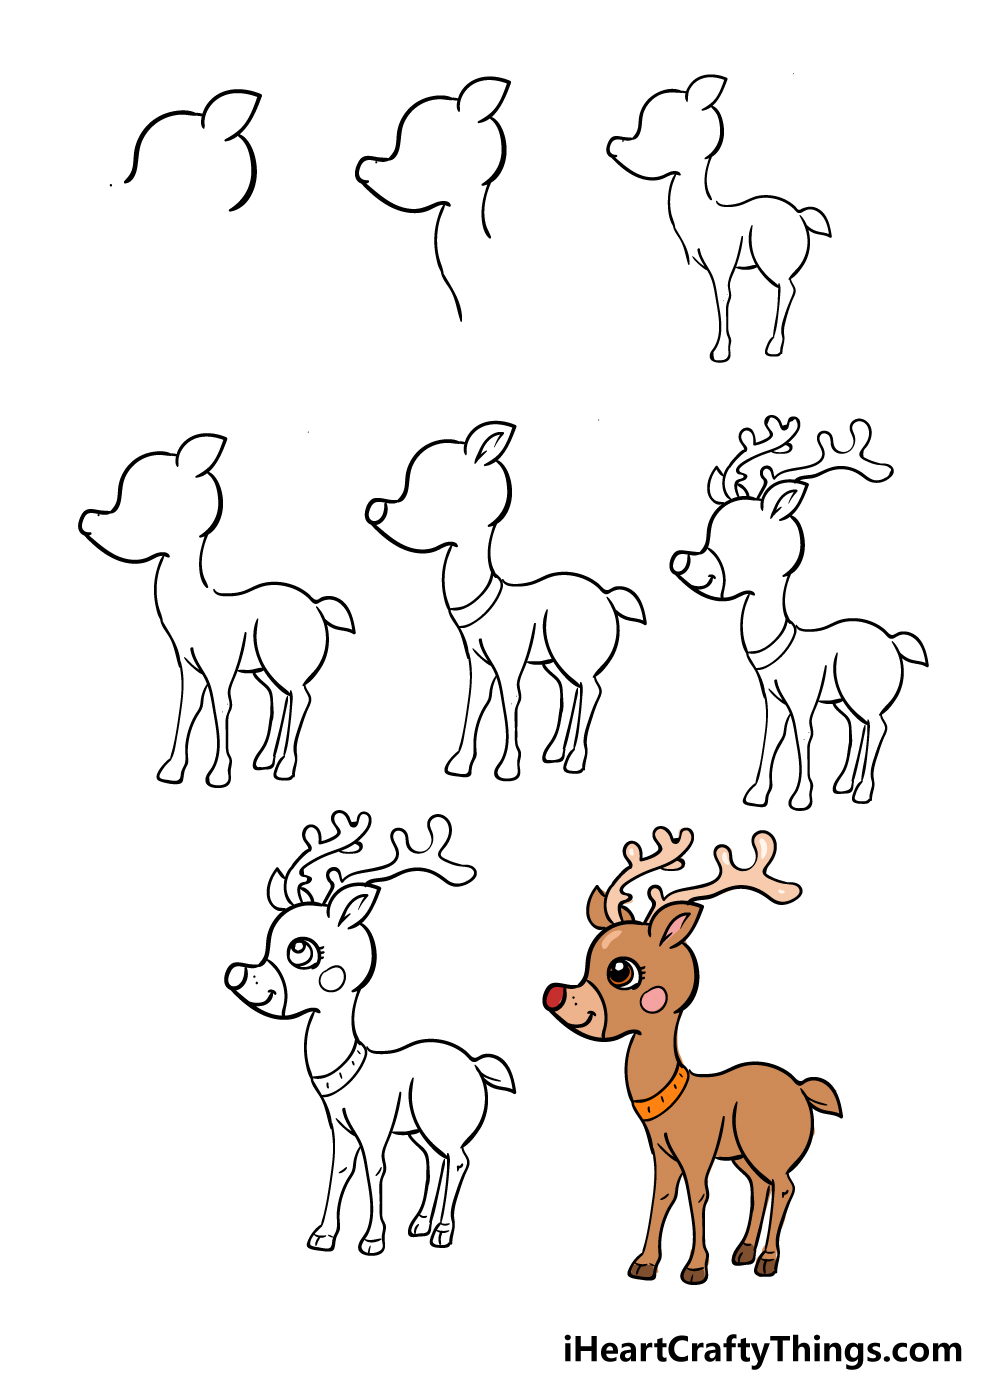 Reindeer With Christmas Lights drawing free image download